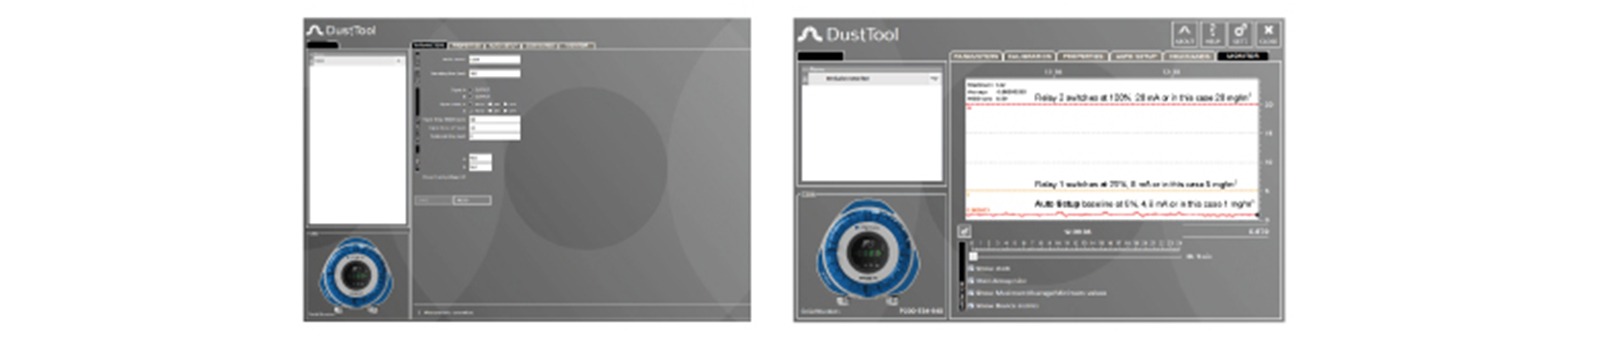 dusttool setting software